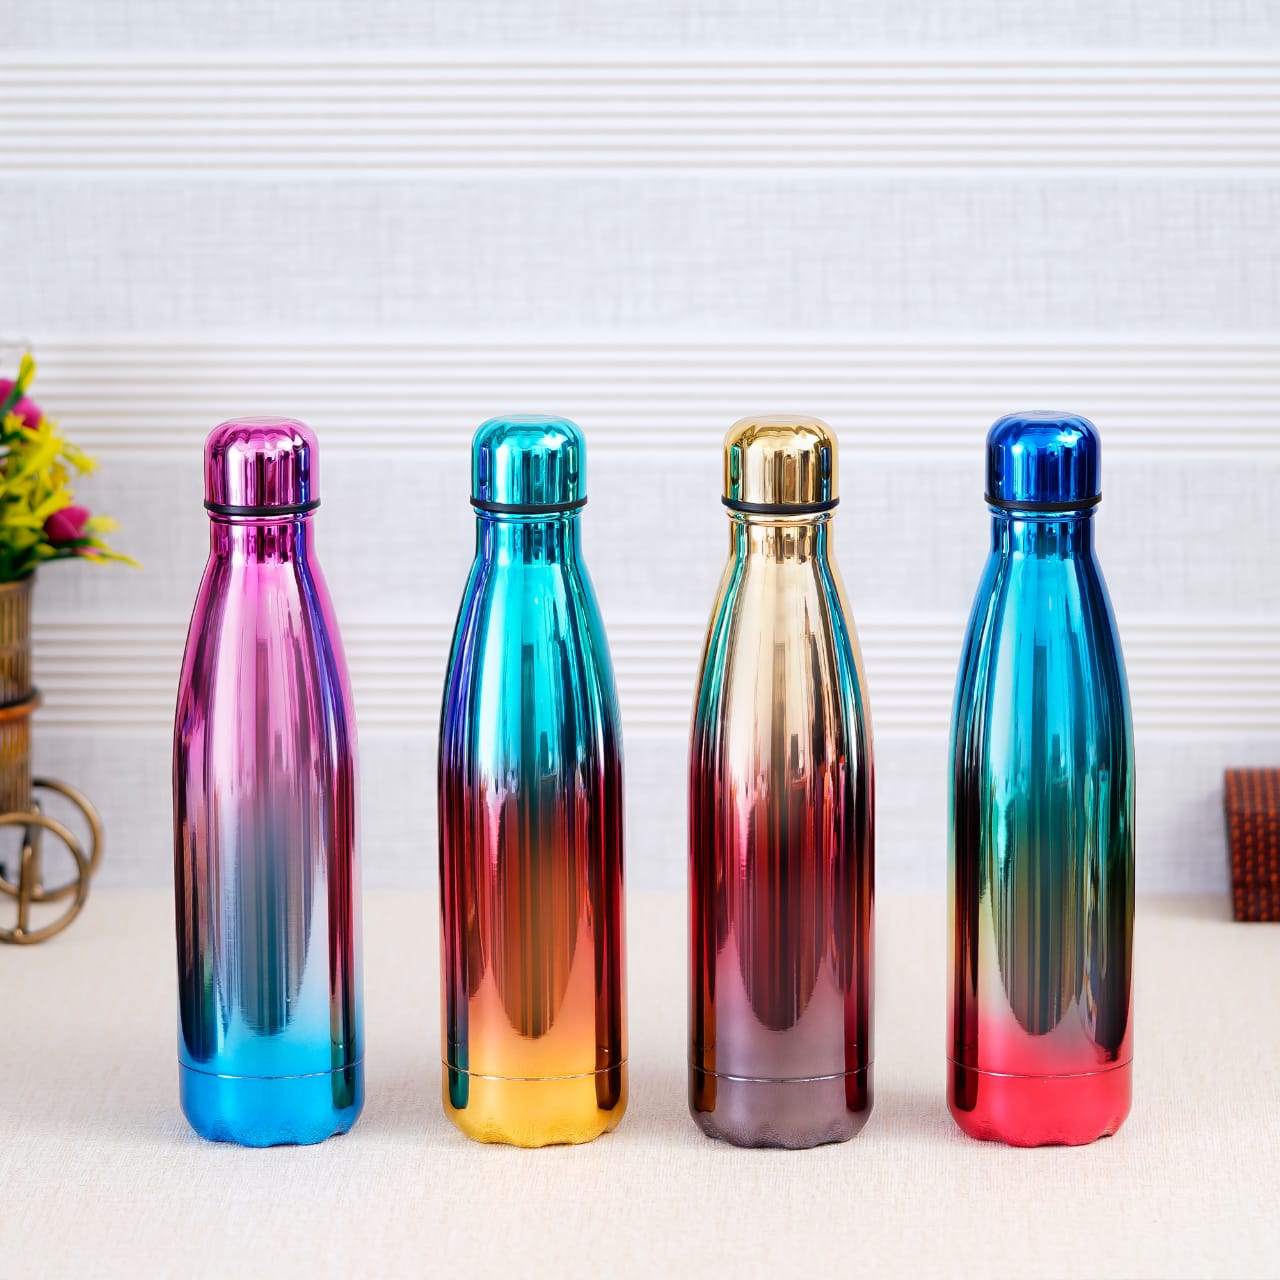 Personalized Rainbow Cola Shape Water Bottle Laser Engraved - Assorted Colors - 500ml - For Return Gift, Corporate Gifting, Office or Personal Use